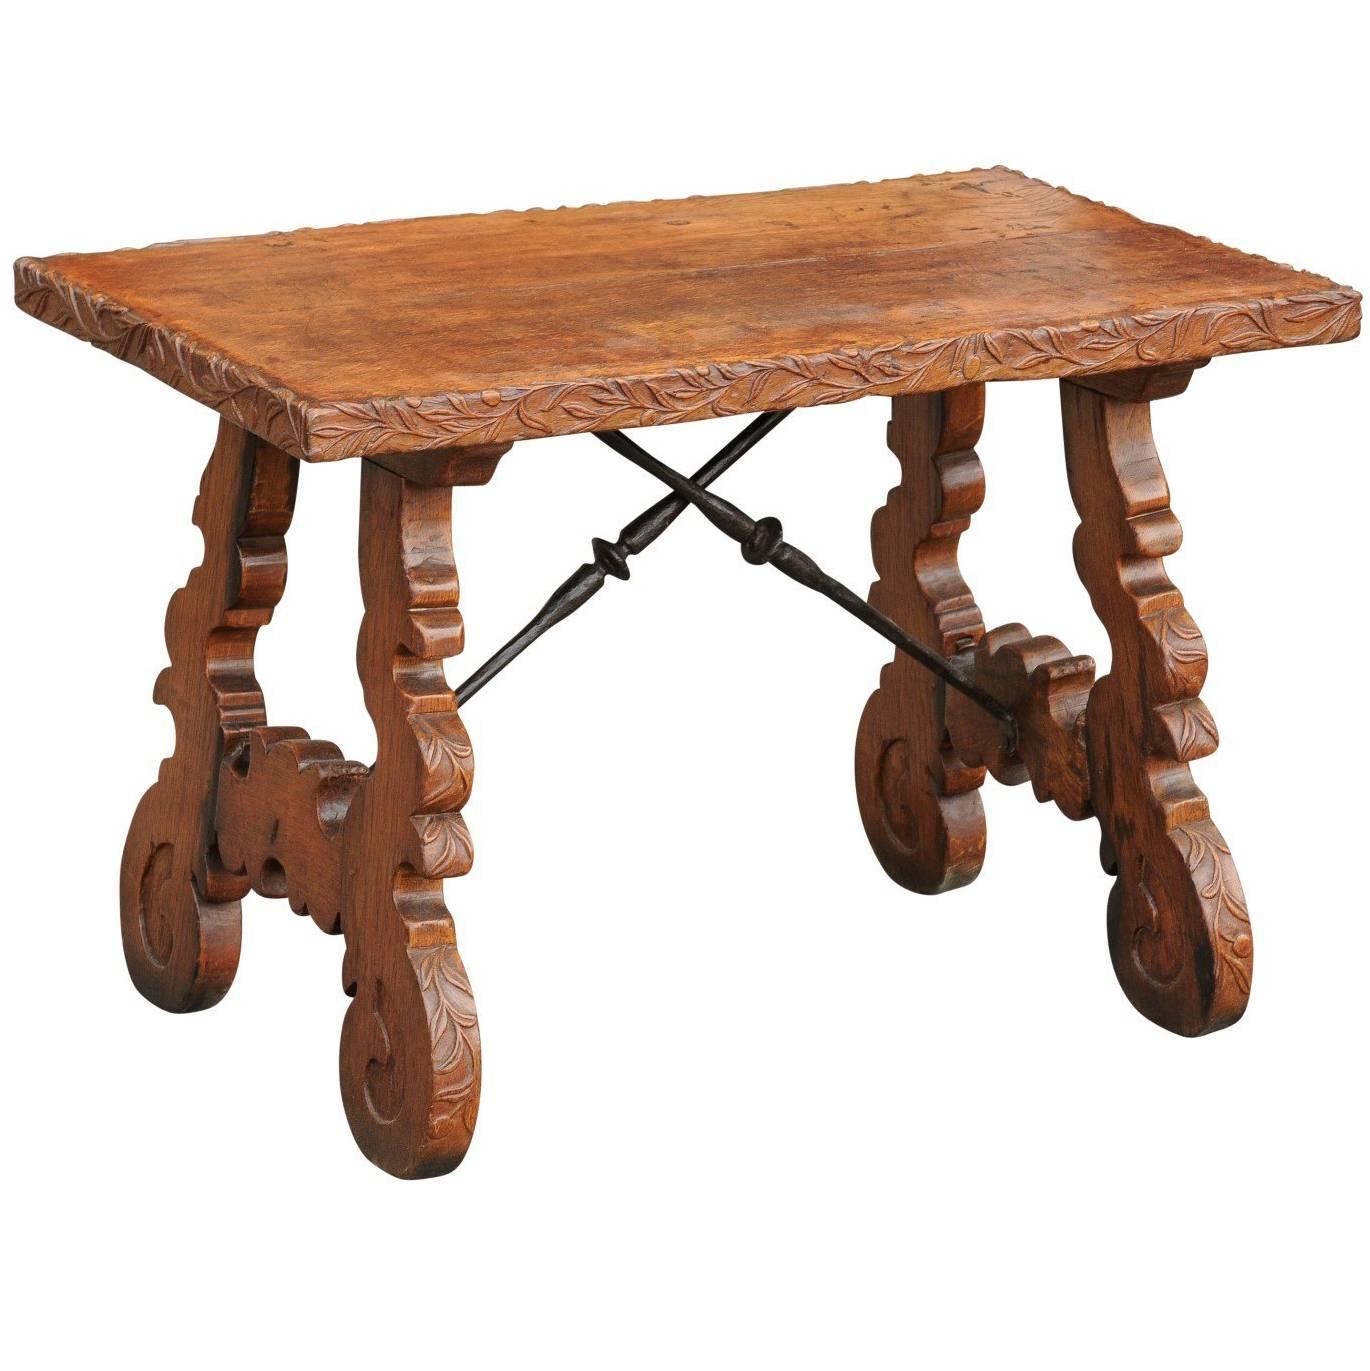 French 1920s Carved Oak Low Side Table with Iron Stretcher and Lyre-Shaped Legs